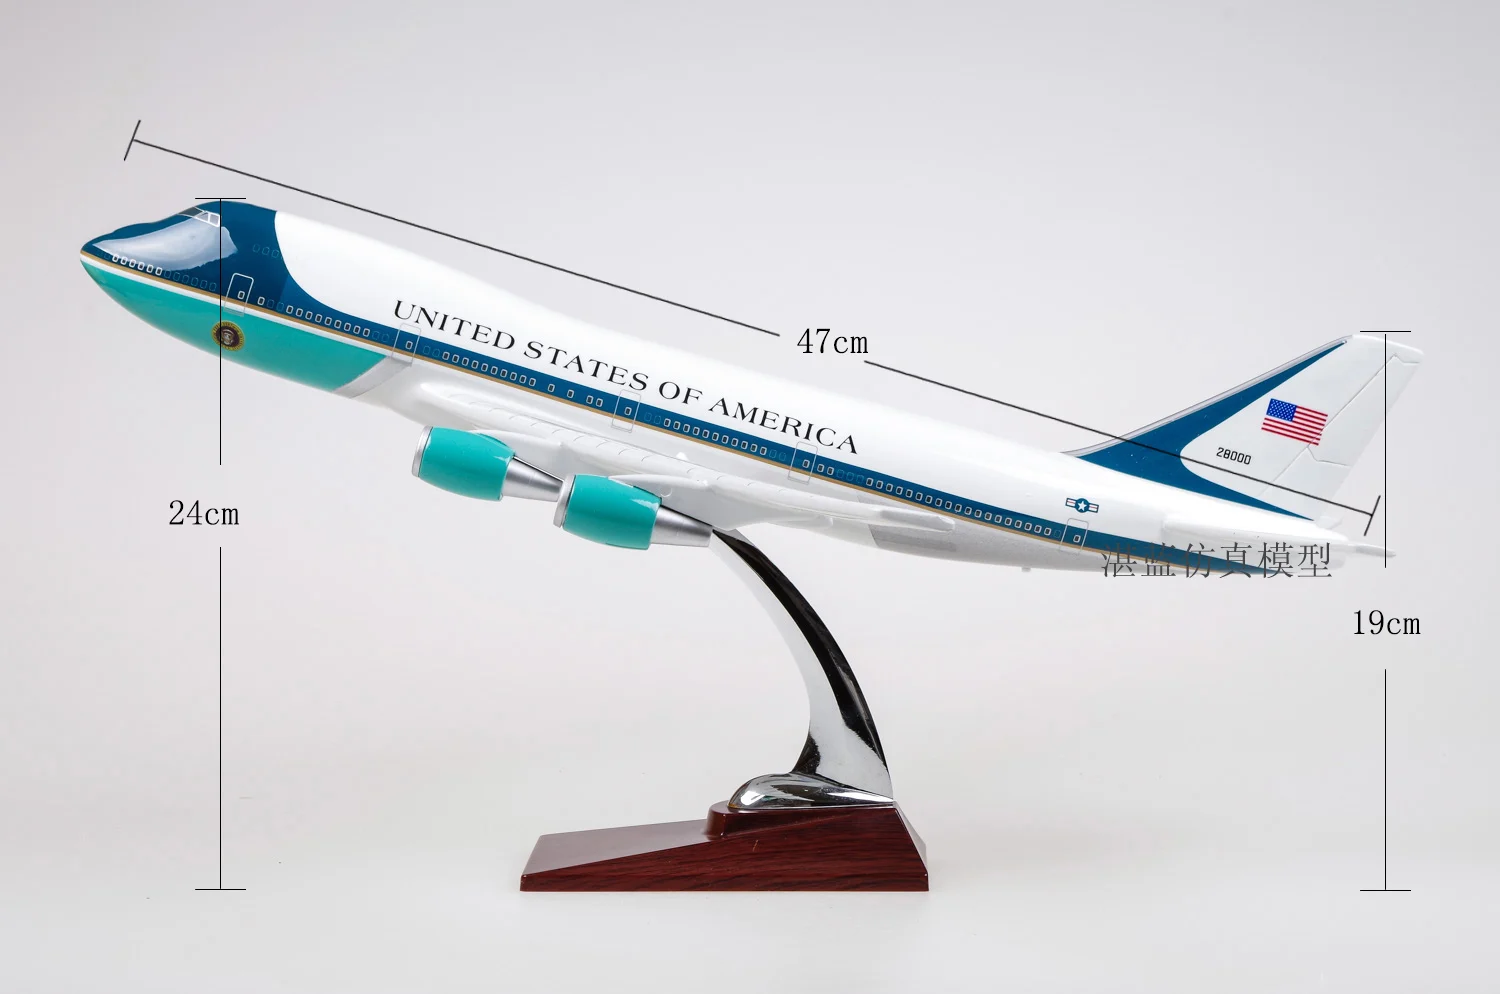 with Lights and Wheels 1//150 47cm Aircraft Model Toy Boeing 747 Air Force